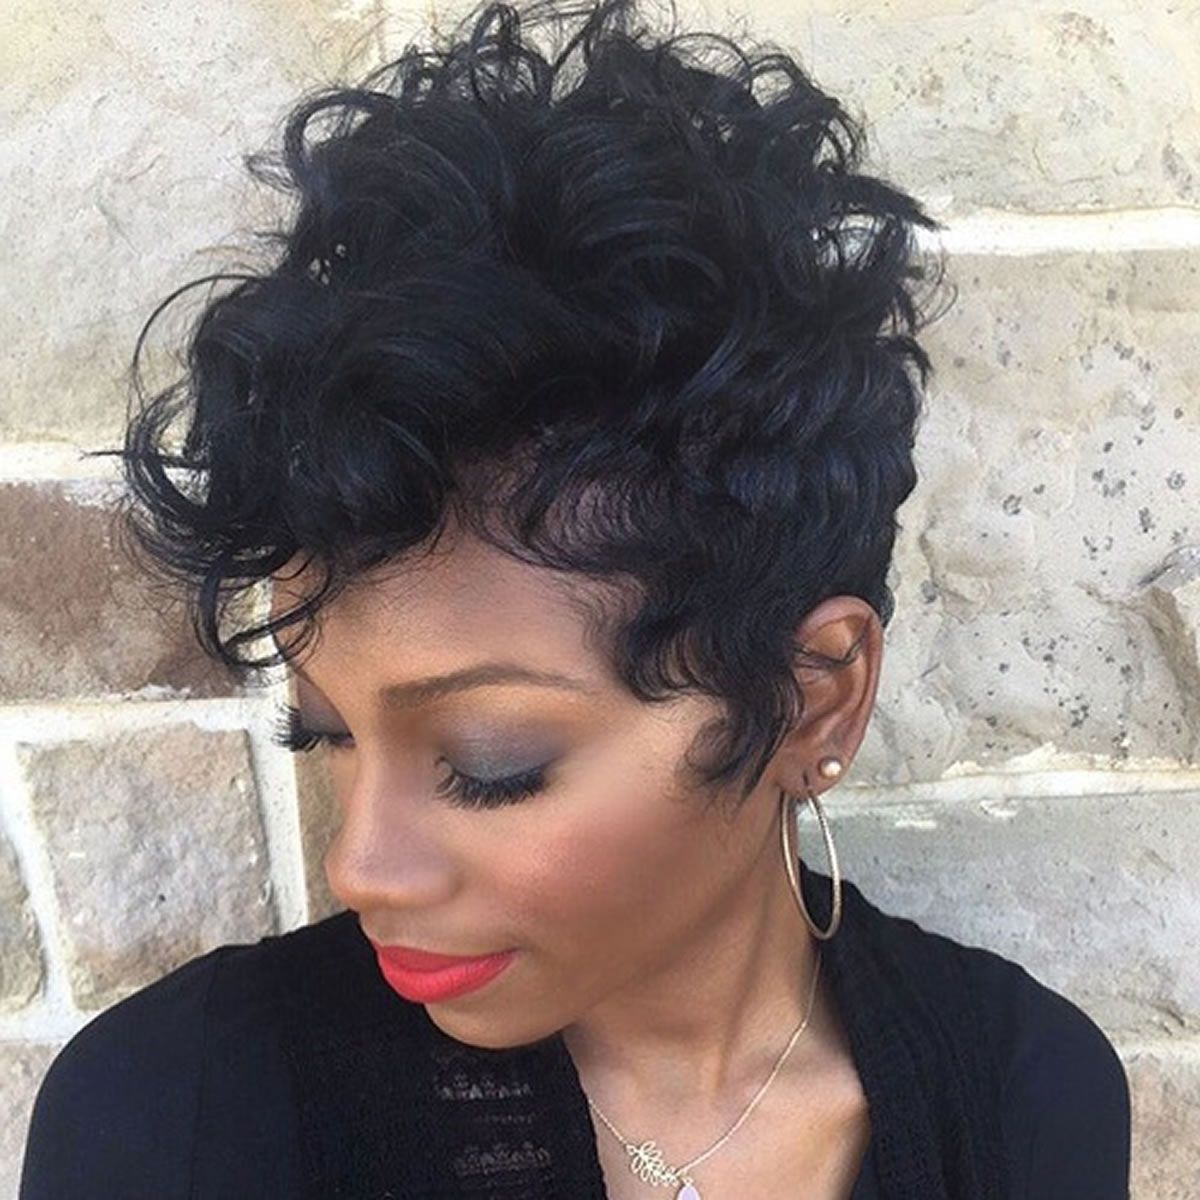 Pixie Hairstyles Short Hair 2019 And Inspiration For Women With Pertaining To Current African American Messy Ashy Pixie Haircuts (View 4 of 15)